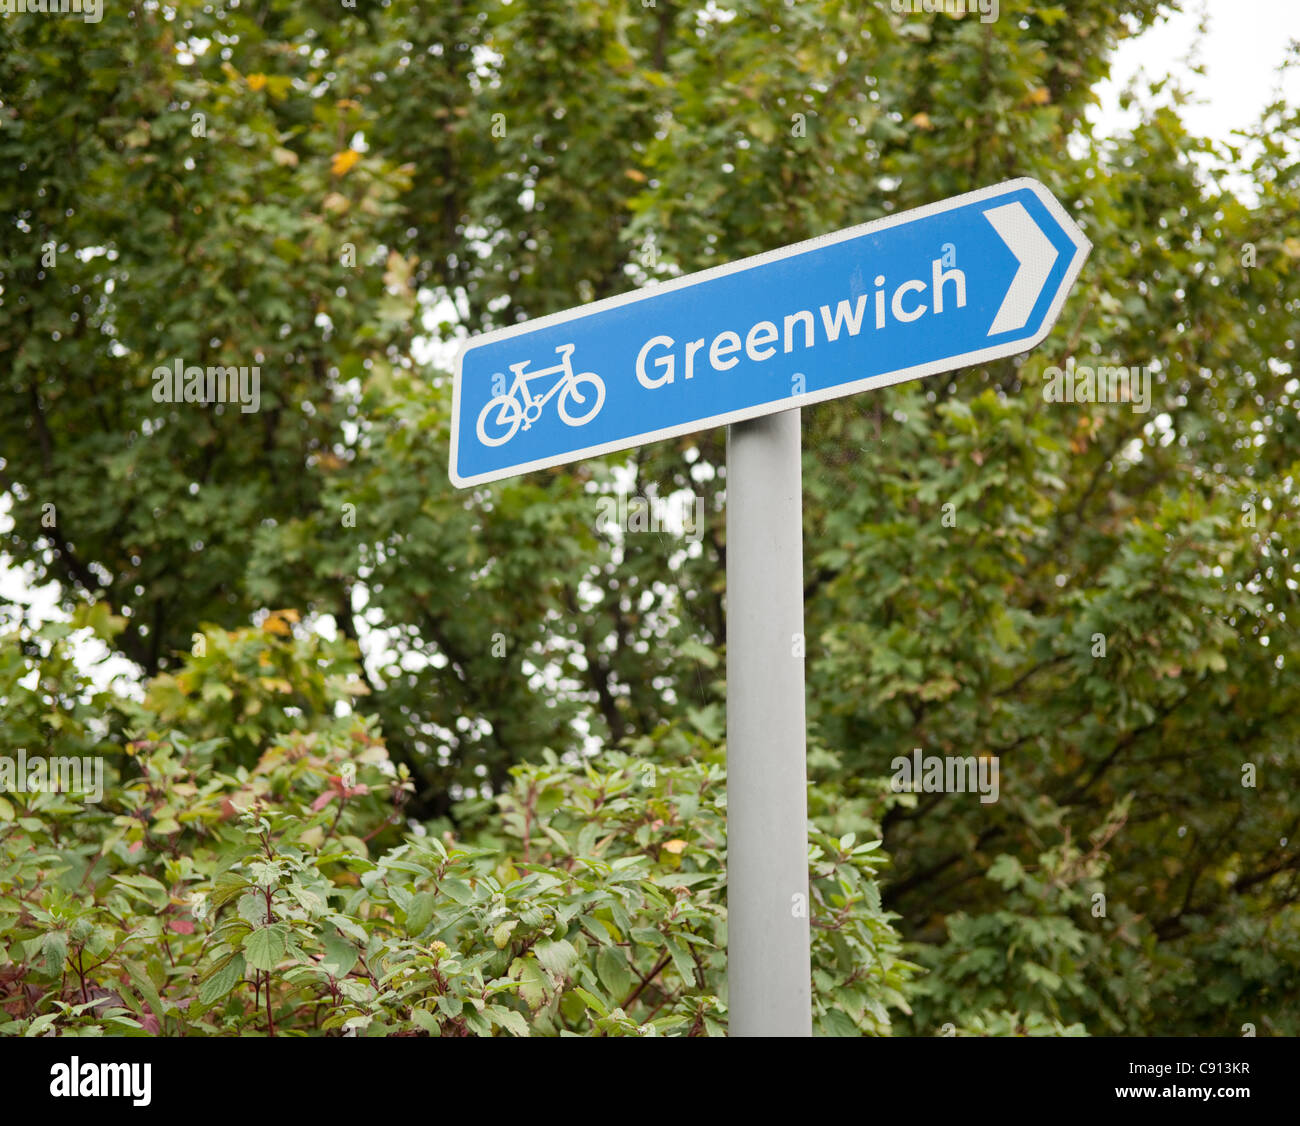 Greenwich is an area of South London which has many wide open spaces parks and gardens and is the focus of regeneration in that Stock Photo